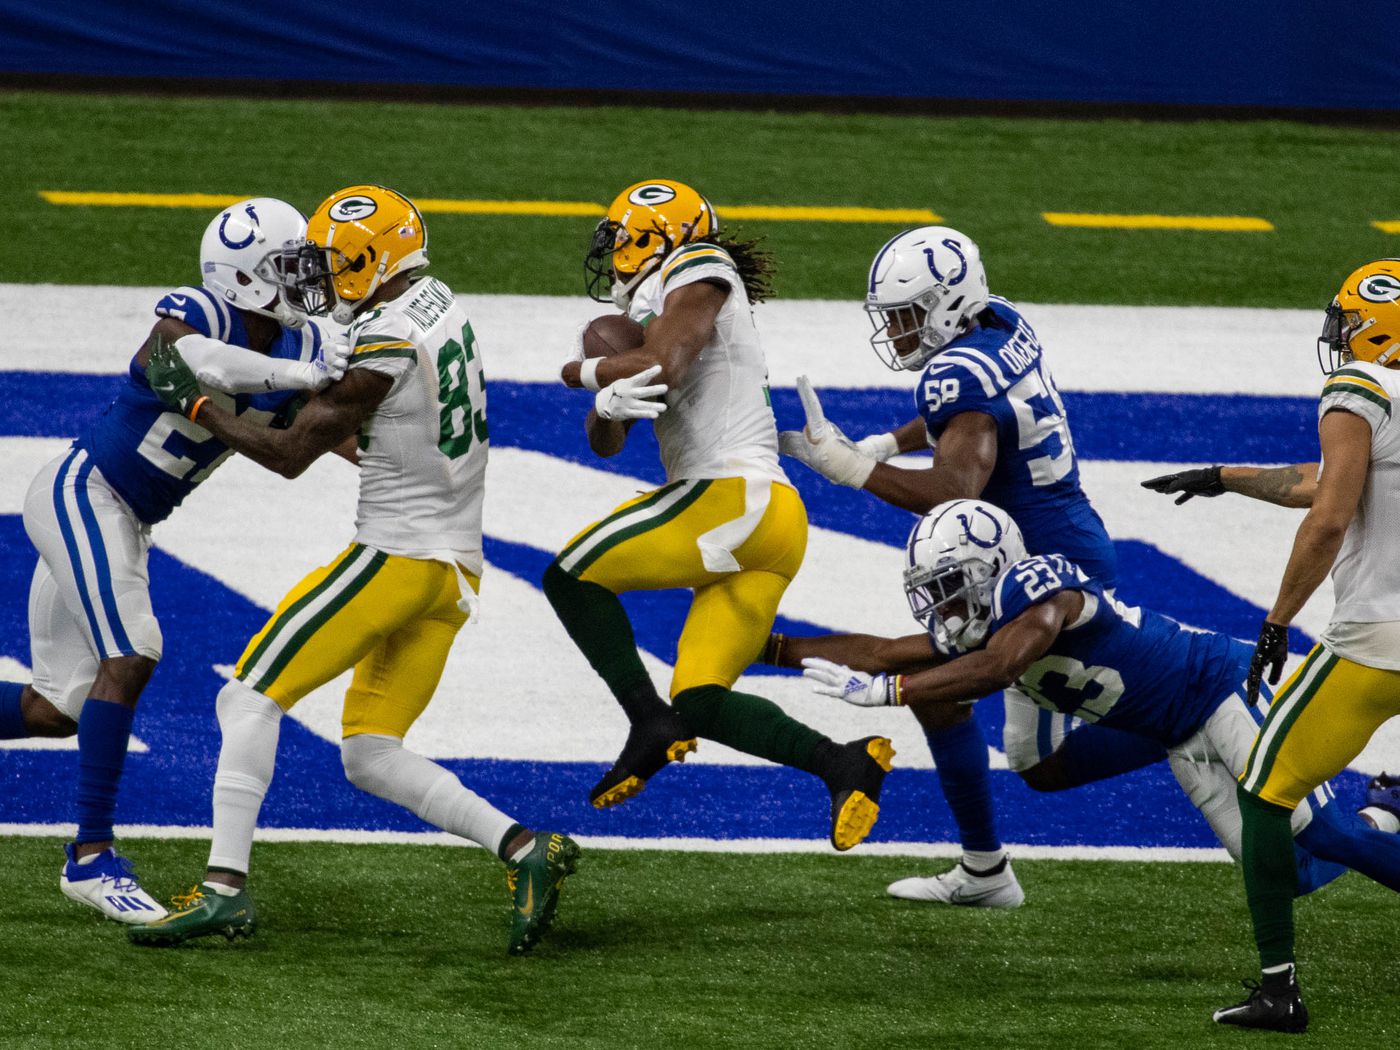 Packers Friday Musings: Blocking from the WRs helped spring big plays against the Colts - Acme Packing Company